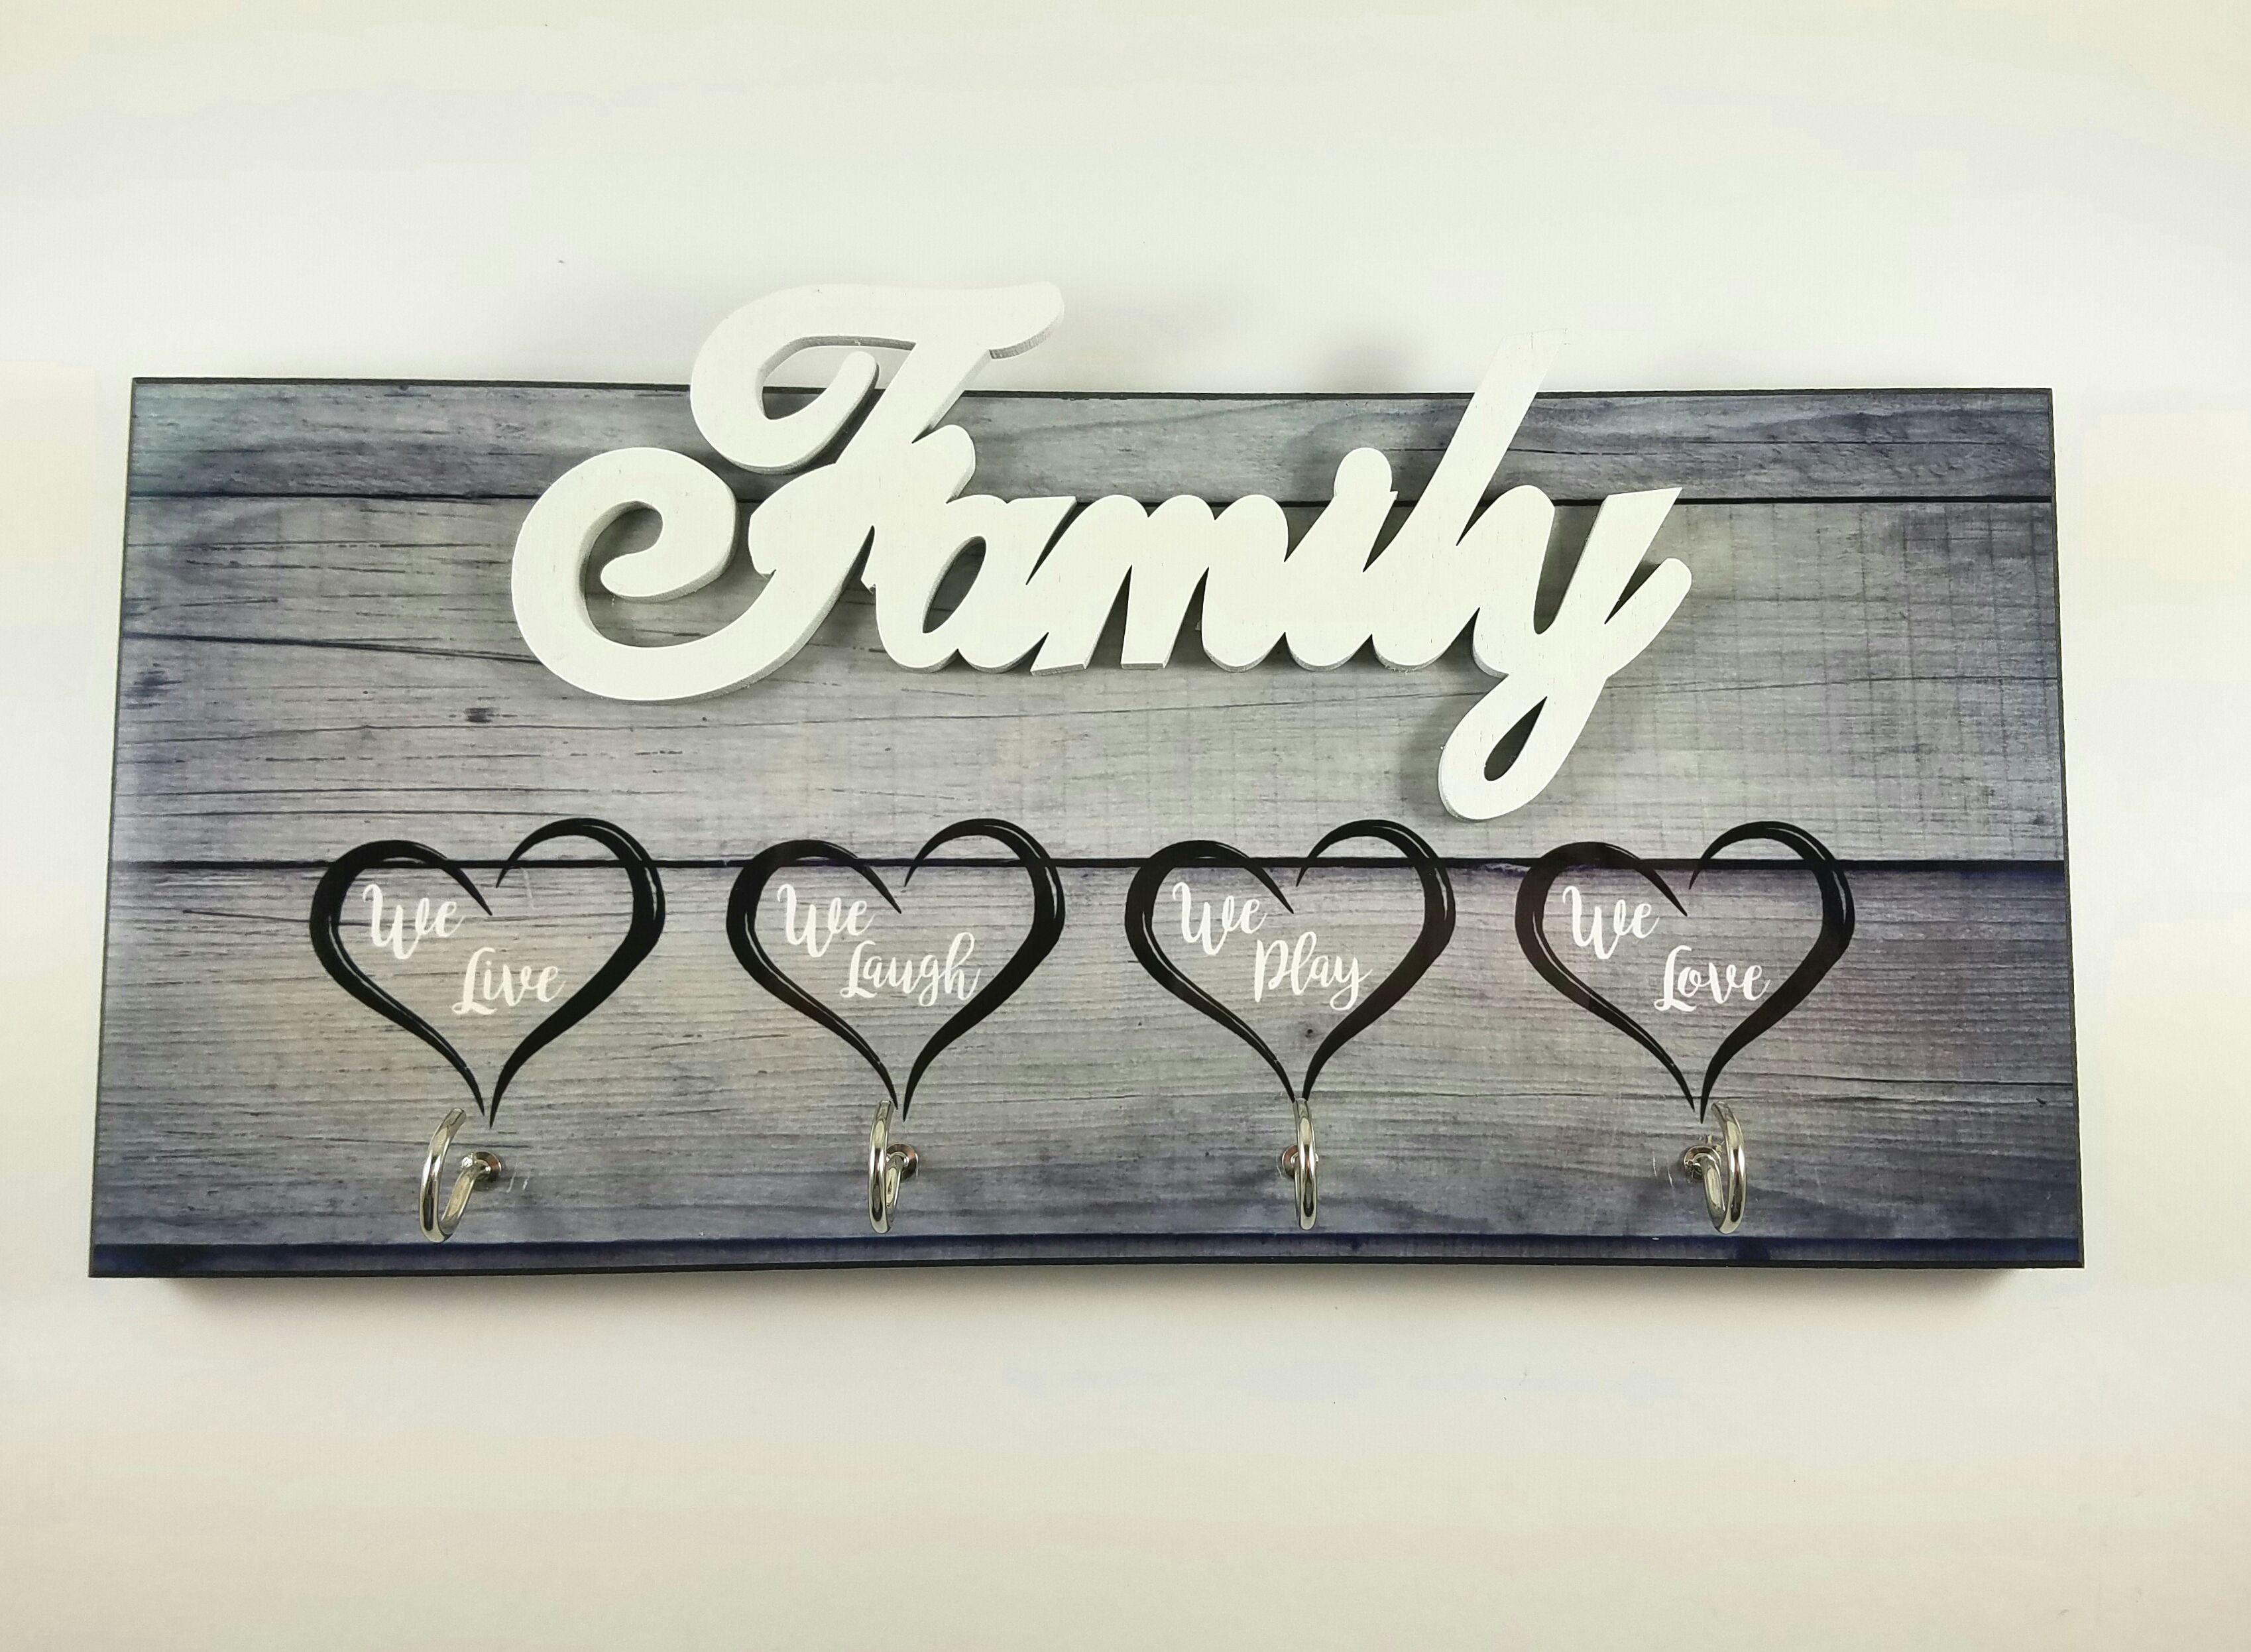 Family Key Rack made with sublimation printing